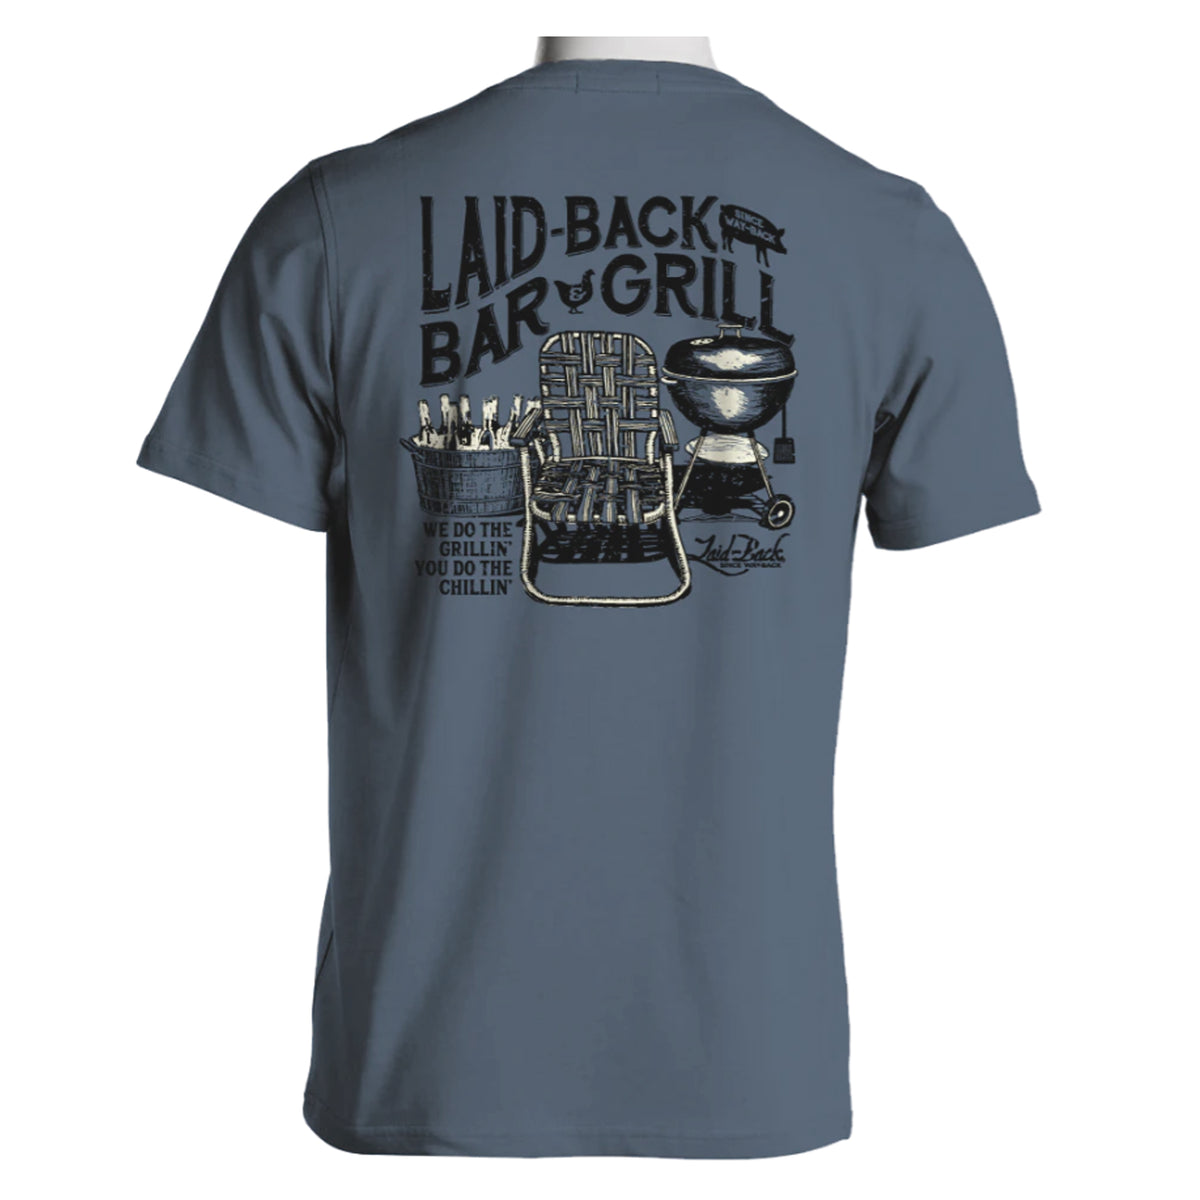 Laid Back Bar and Grill Tee